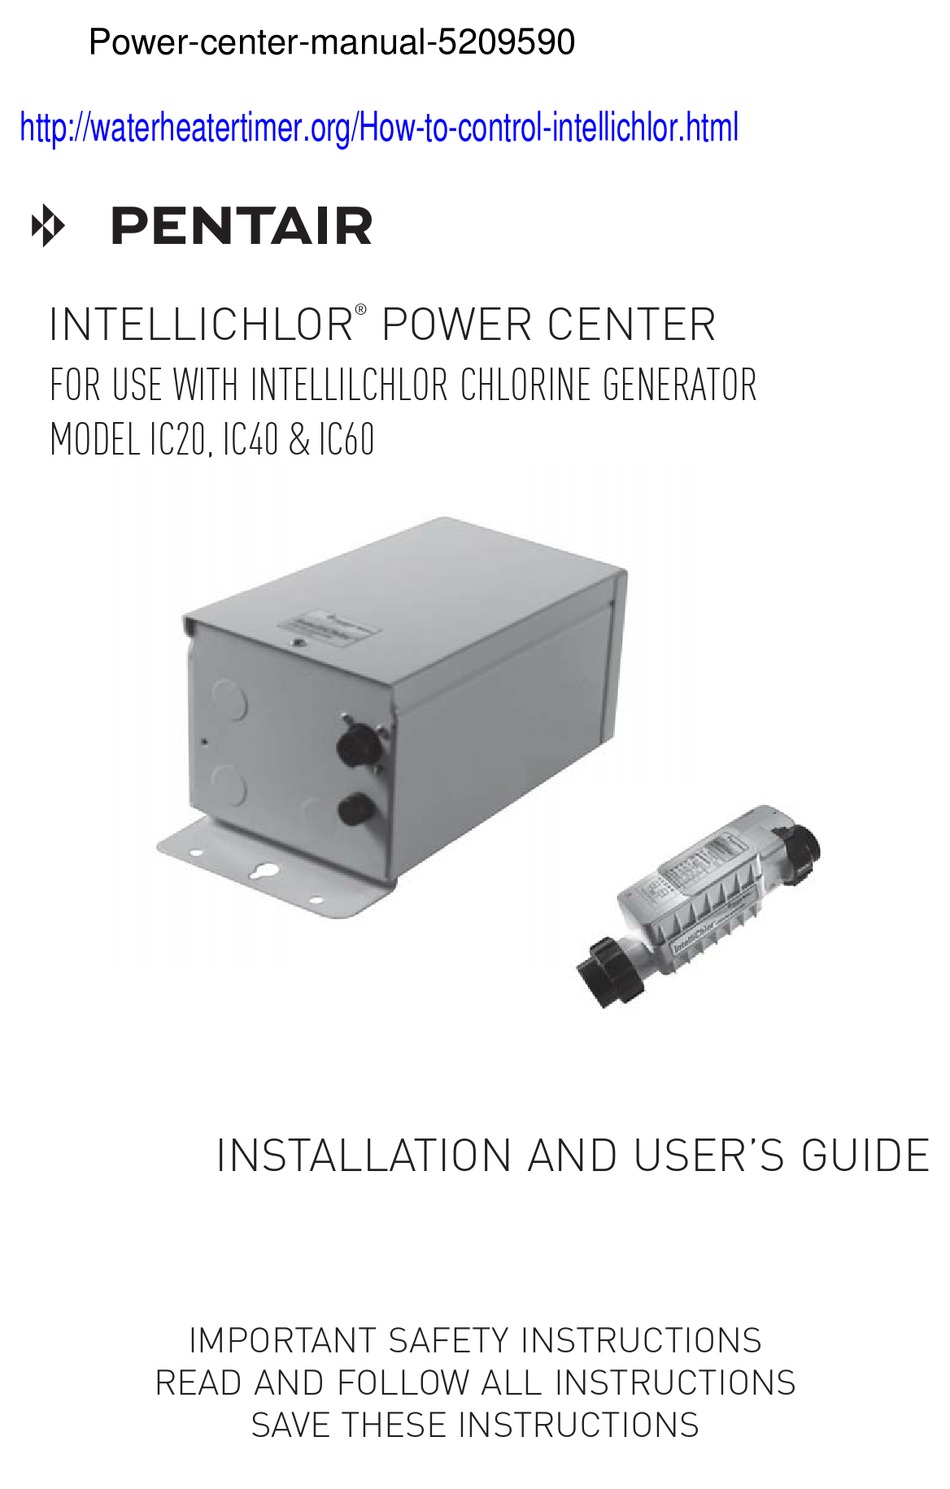 PENTAIR INTELLICHLOR IC20 INSTALLATION AND USER MANUAL Pdf Download